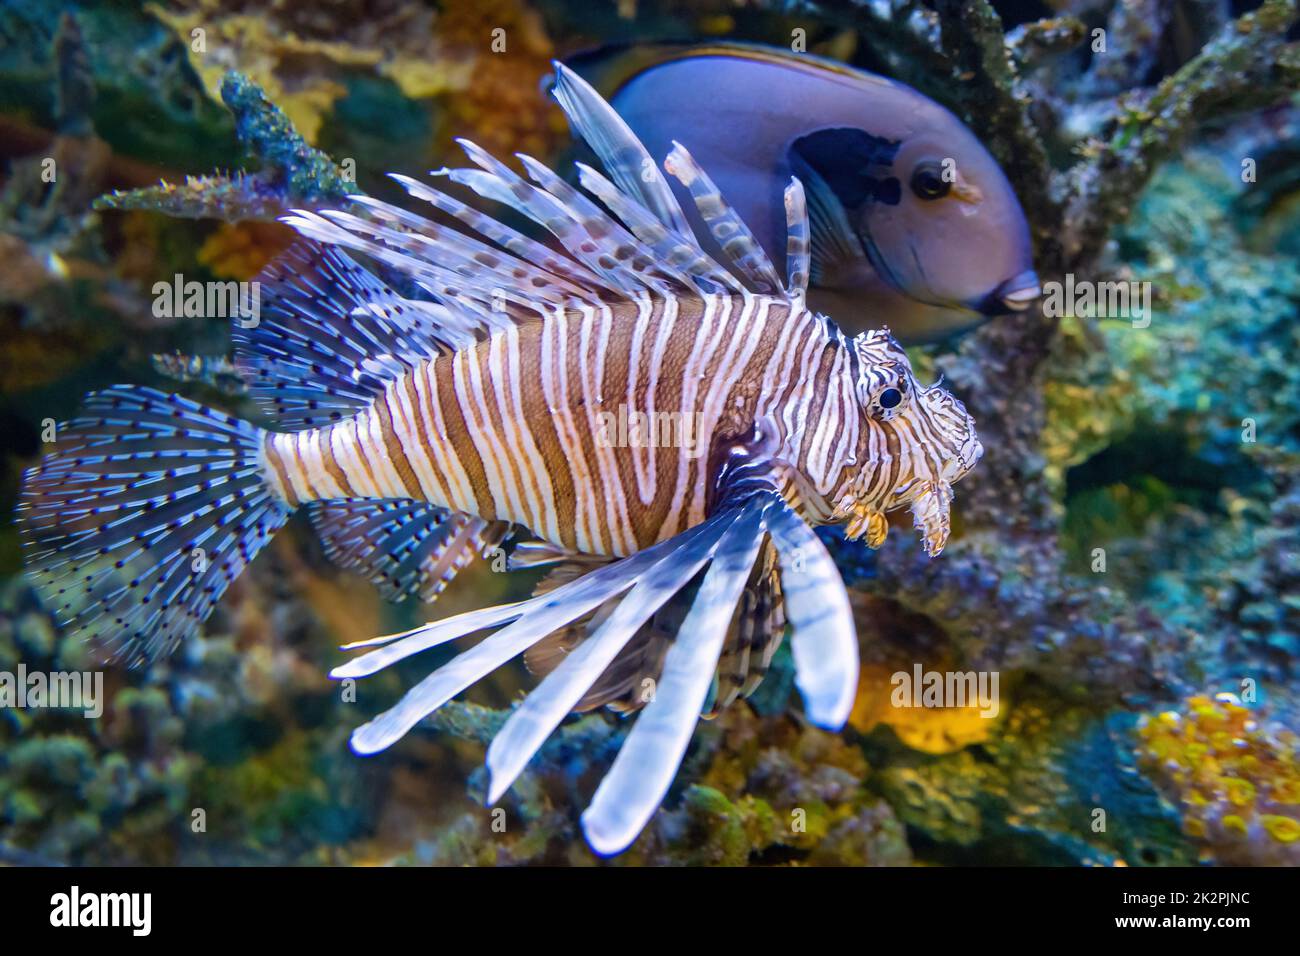 Exotic red lionfish close up dangerous predator in fresh water corals Stock Photo